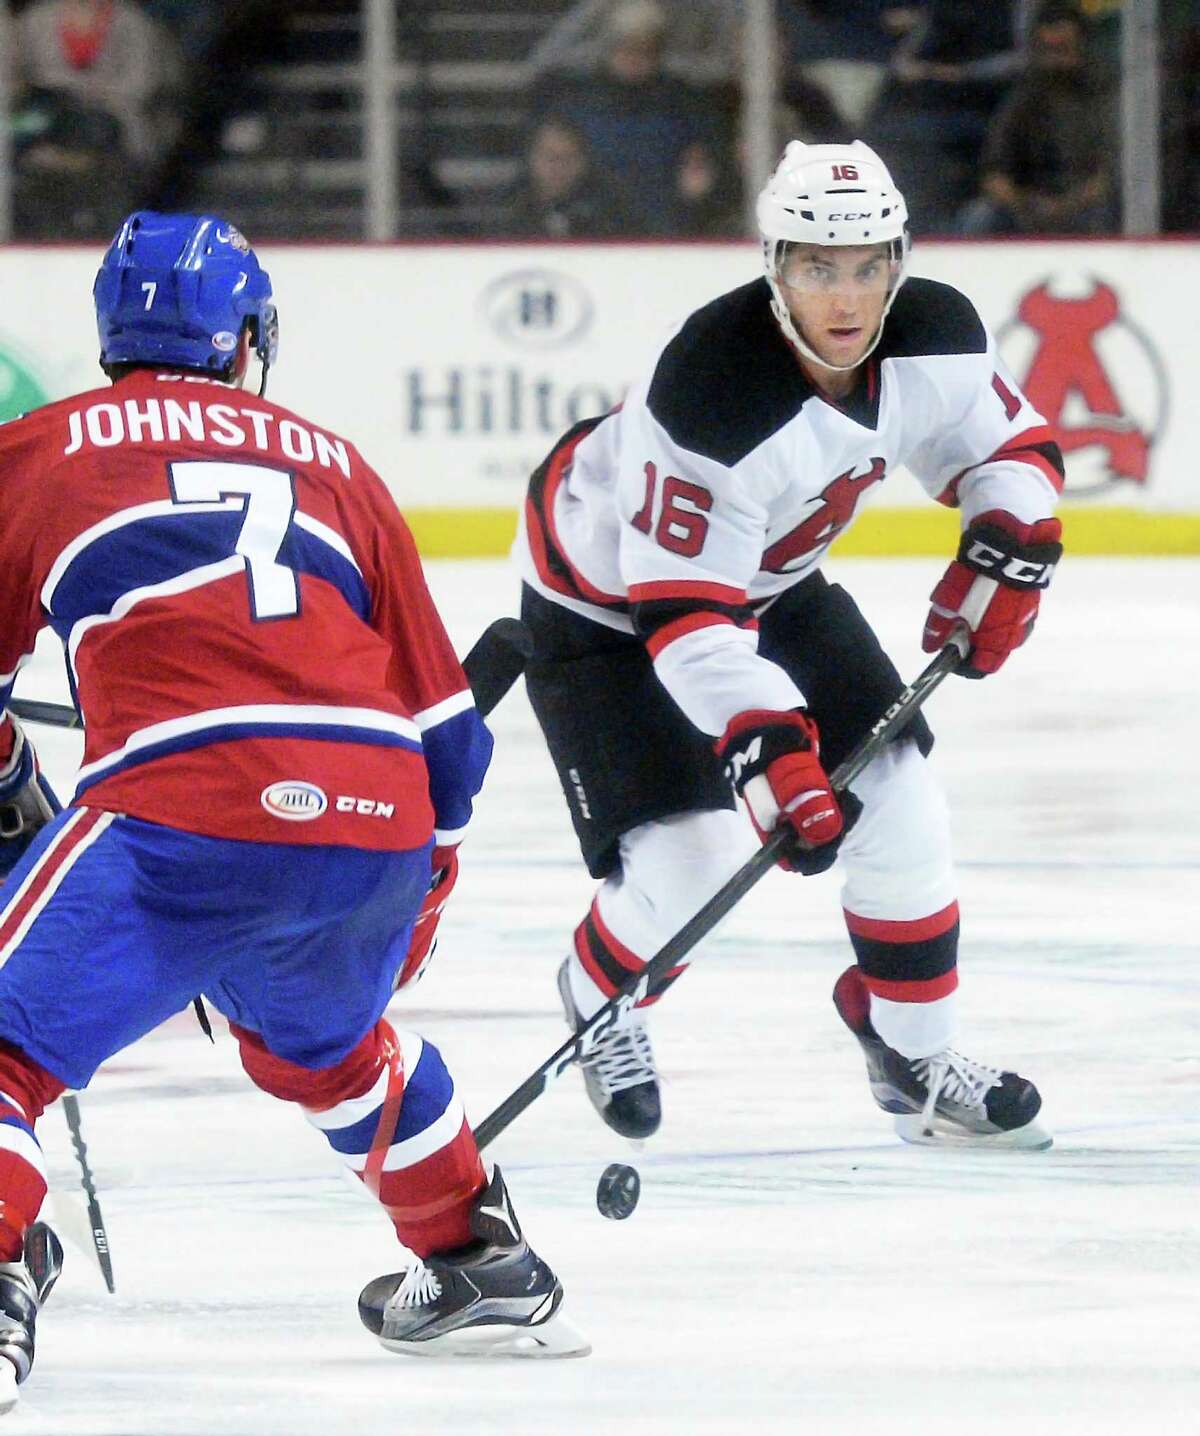 Albany Devils' #16 Ben Sexton works his way past St. John's IceCaps' #7 Ryan Johnston during Saturday's home opener at the Times Union Center Oct. 15, 2016 in Albany, NY. (John Carl D'Annibale / Times Union) ORG XMIT: MER2016101520303044